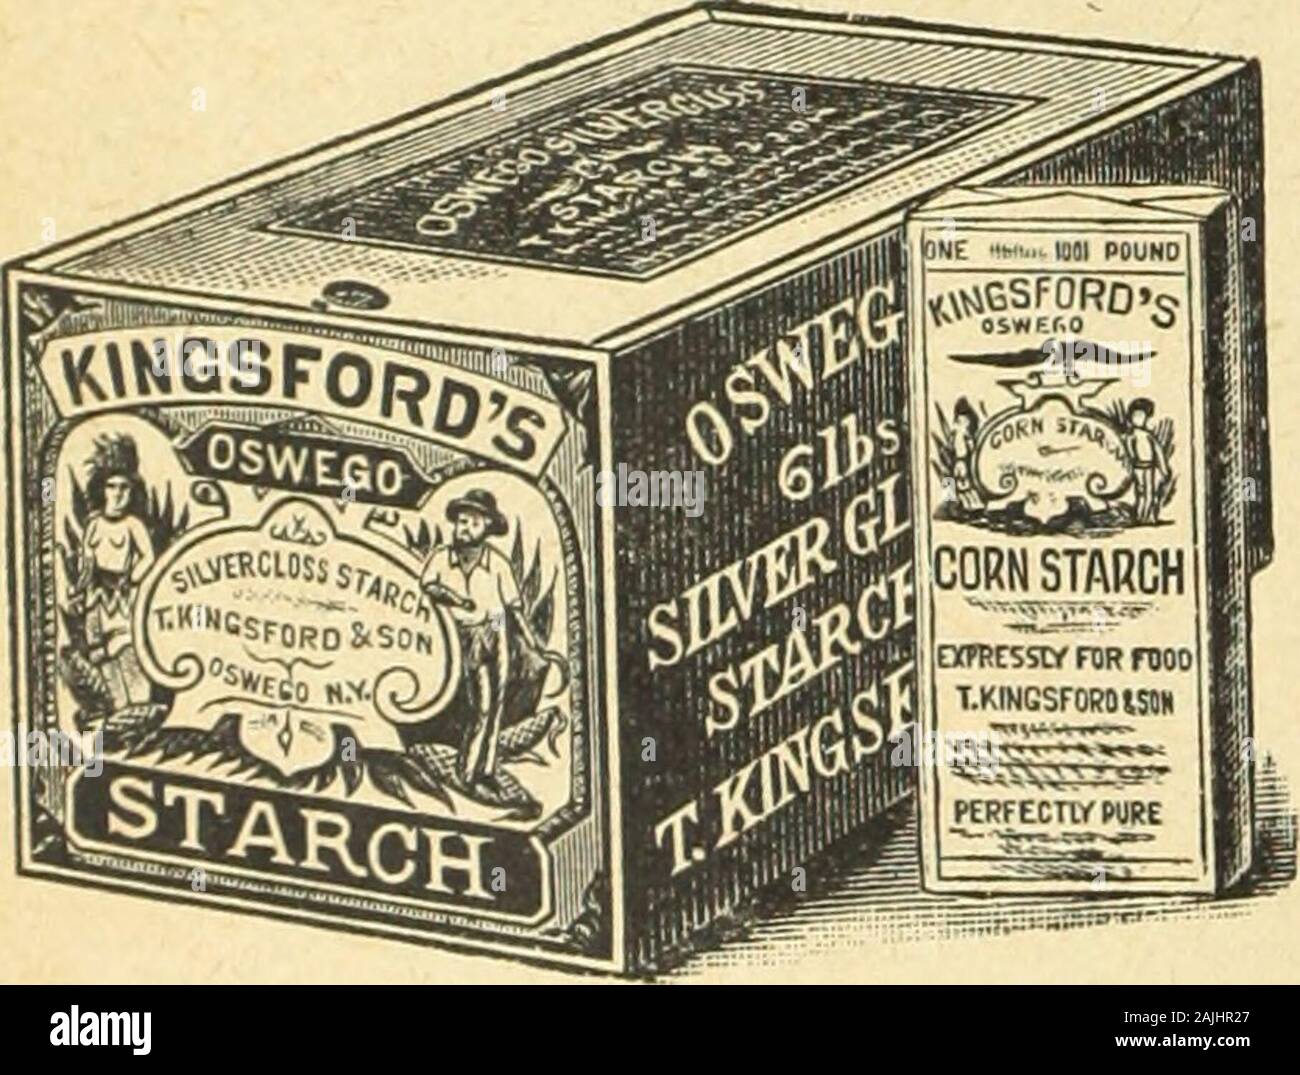 Canadian grocer January-June 1892 . J6 68c 1 fancy tins 68c 4 ? *0C 1 glass jars 75c GRANULATED 8MOKING TOBACCO: Uncle Tom, 1-5, 6 lb boxes 45c 1-10, 61b 45c LONG CDT SMOKING TOBACCO. Wig Wag, 1-5, 61b 43c 1-10,6 lb 45c PINE CUT CHEWING TOBACCO. Golden Thread, 5 & 10 lb pails 95c Globe, - 90c Victoria, - - 75c High Court, - 70c Jersey Lilly, - 65c Golden Thread, 1-16 Foil in 4 gro. boxes, per gross 9 05 Solace 1-16 Foil in J gro. boxes, per gross 6 05 cigars—s. Davis & sons, Montreal. Sizes. Per M Madre E Hijo, LordLandsdowne$60 00 Panetelas 60 00 Bouquet 60 00 Perfectos 85 00 Longfellow 85 00 Stock Photo